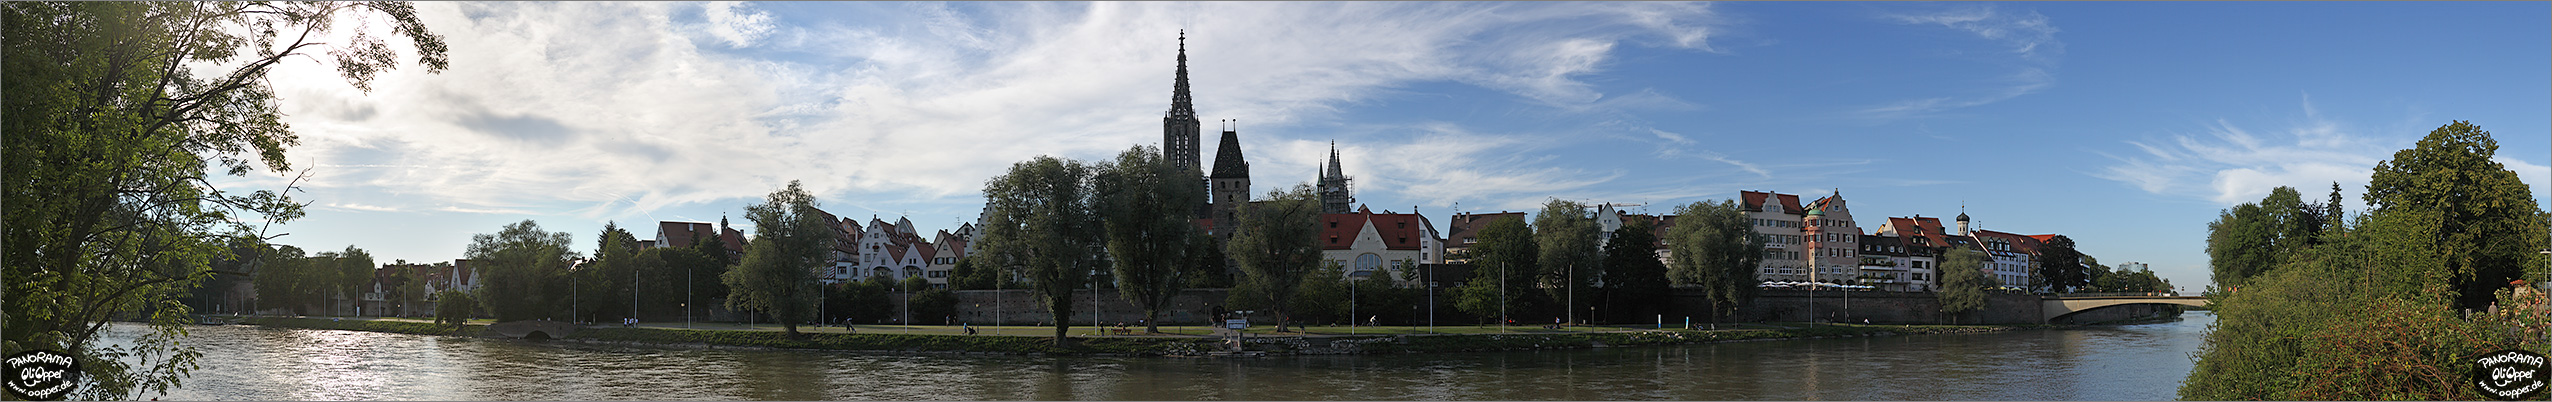 Panorama Ulm - (c) by Oliver Opper